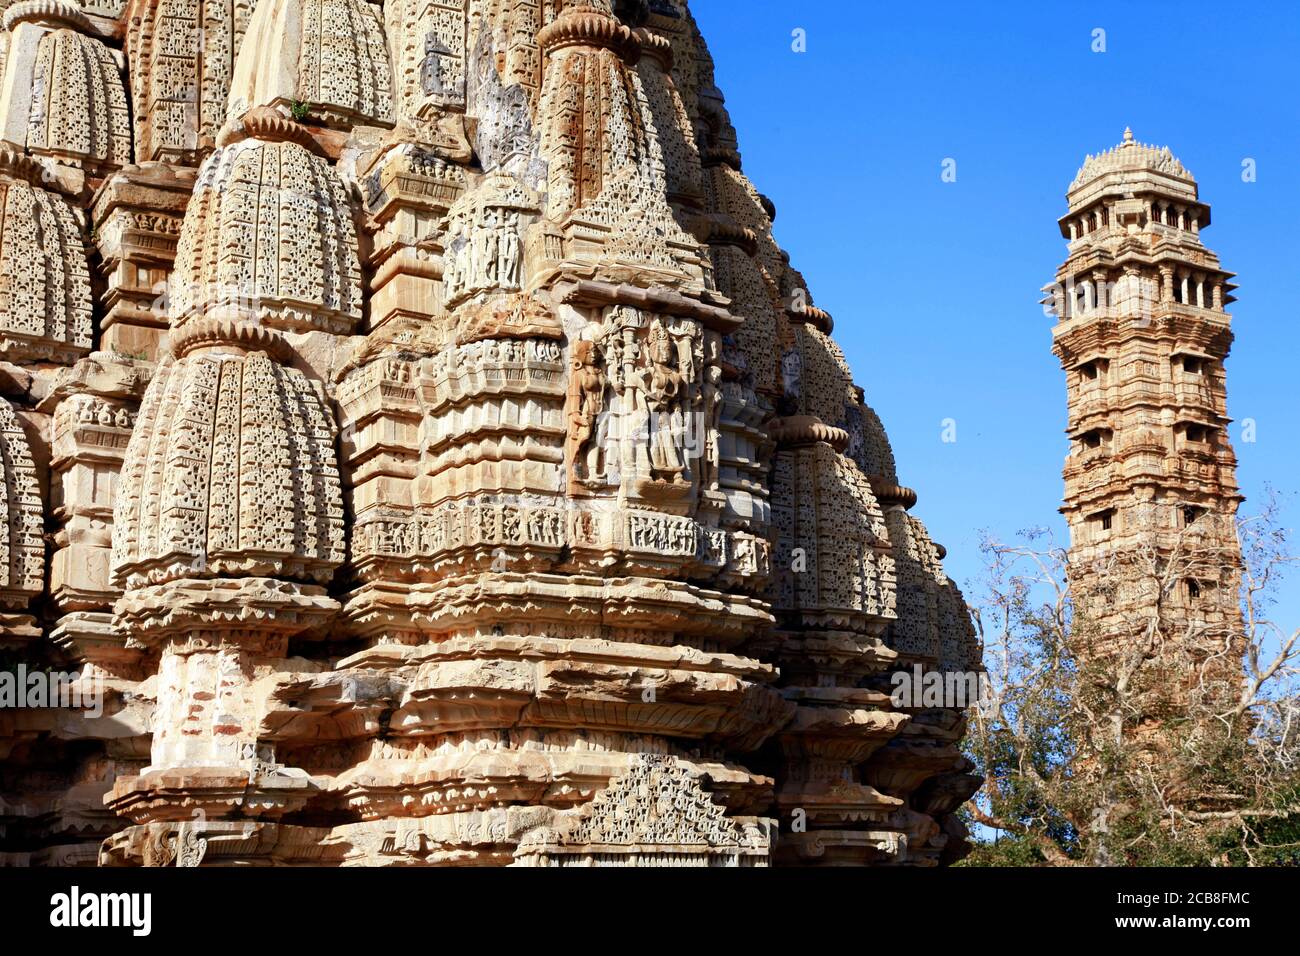 Incredible India. Culture and history. Chittograrh fort and temples with amazing stone carvings. Rajasthan Stock Photo